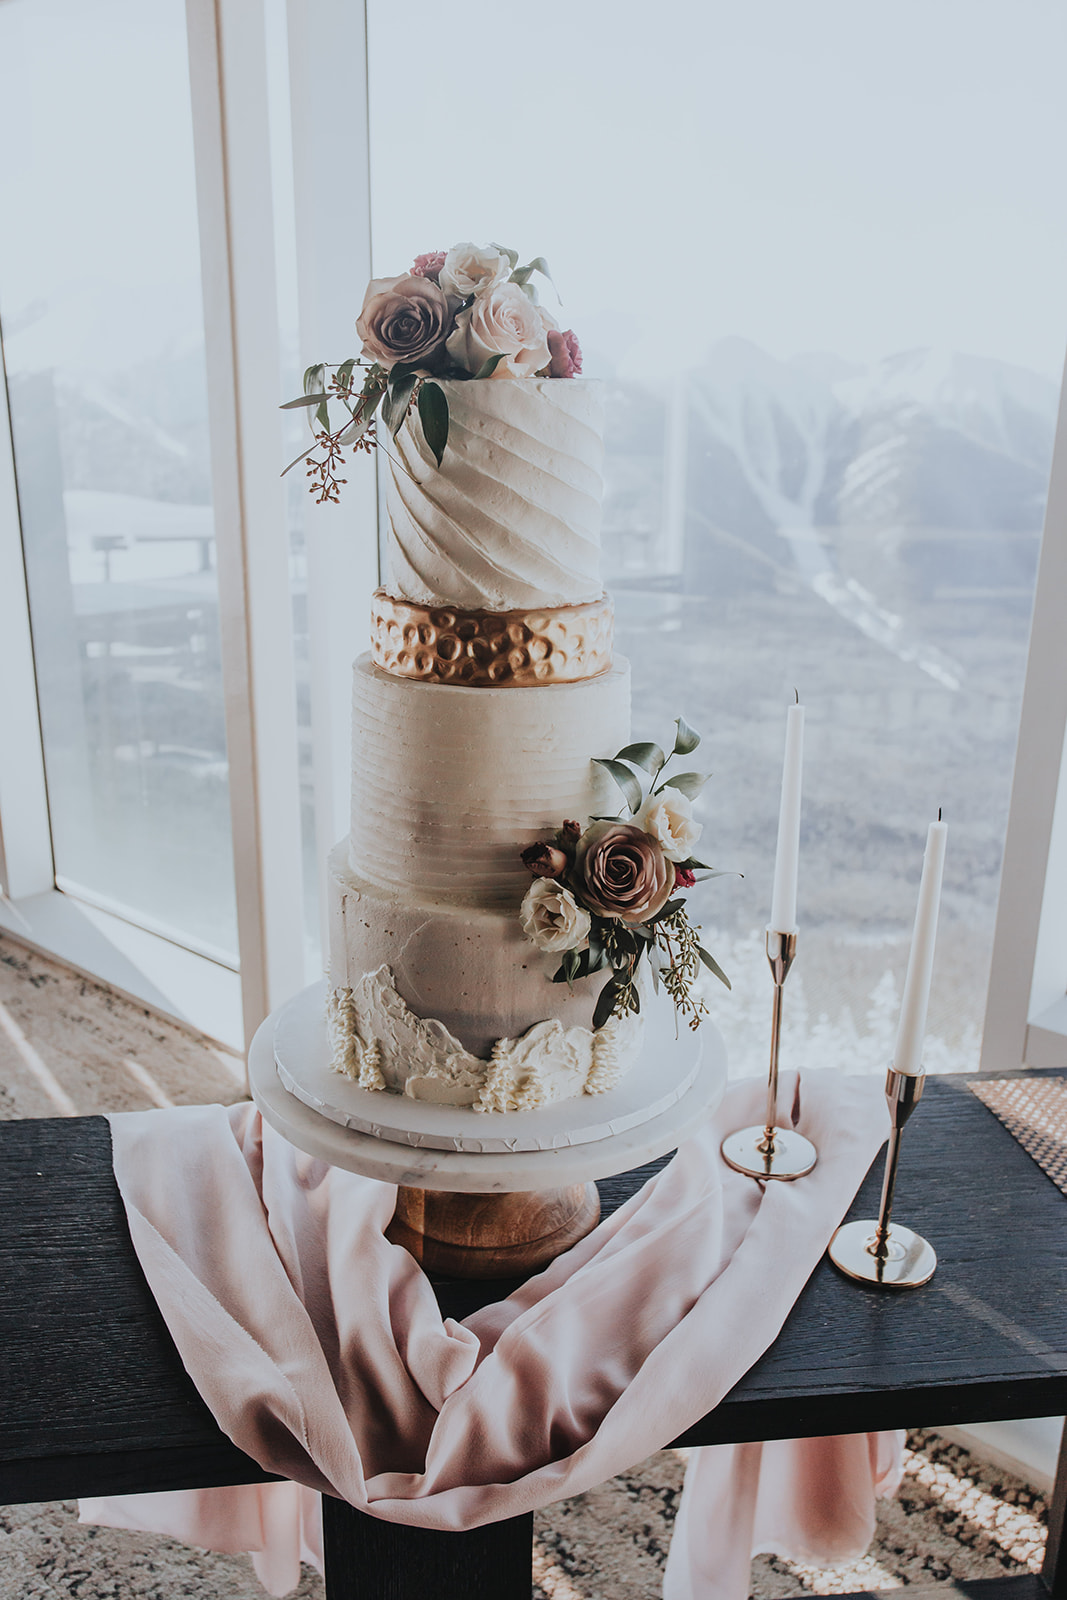 Towering winter and mountain inspired wedding cake with metallic details for a Banff Gondola wedding in the Canadian Rocky Mountains